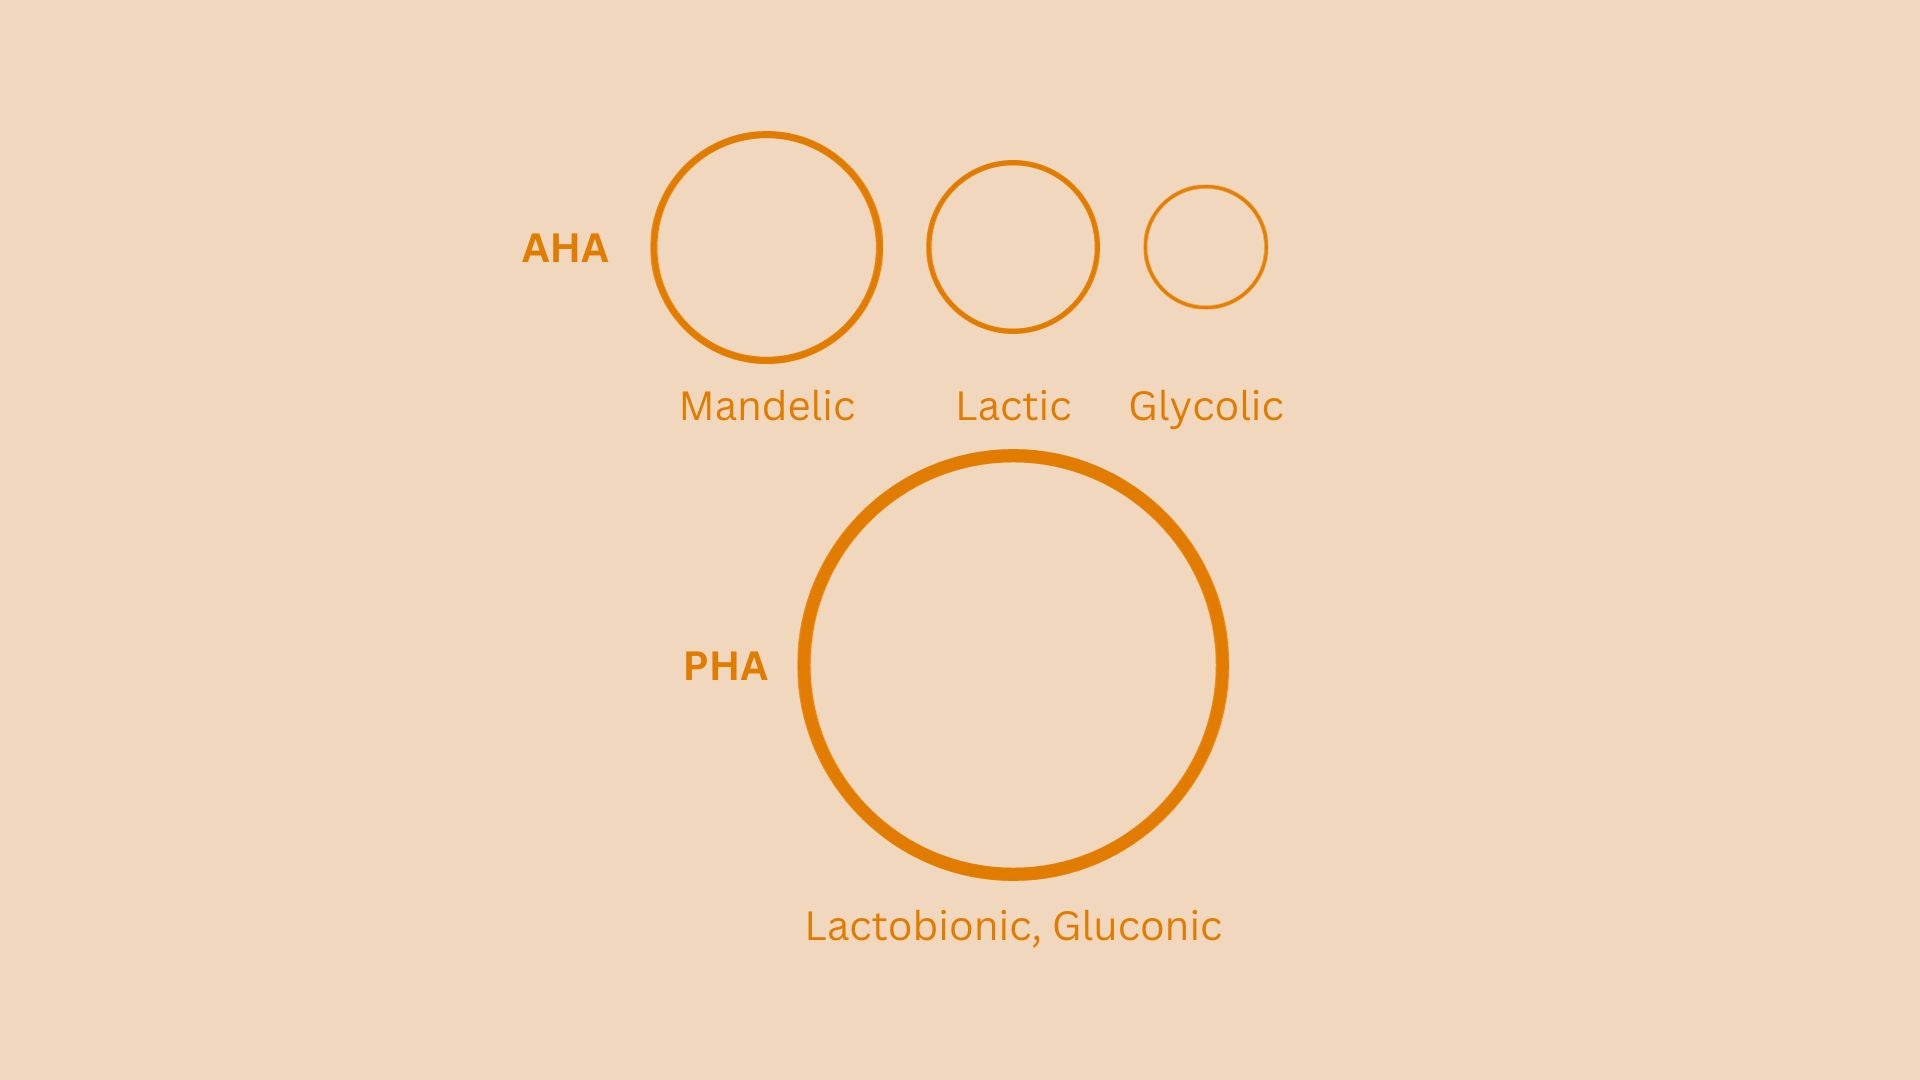 pha molecules are larger than other chemical exfoliants like mandelic acidd, lactic acid and glycolic acid